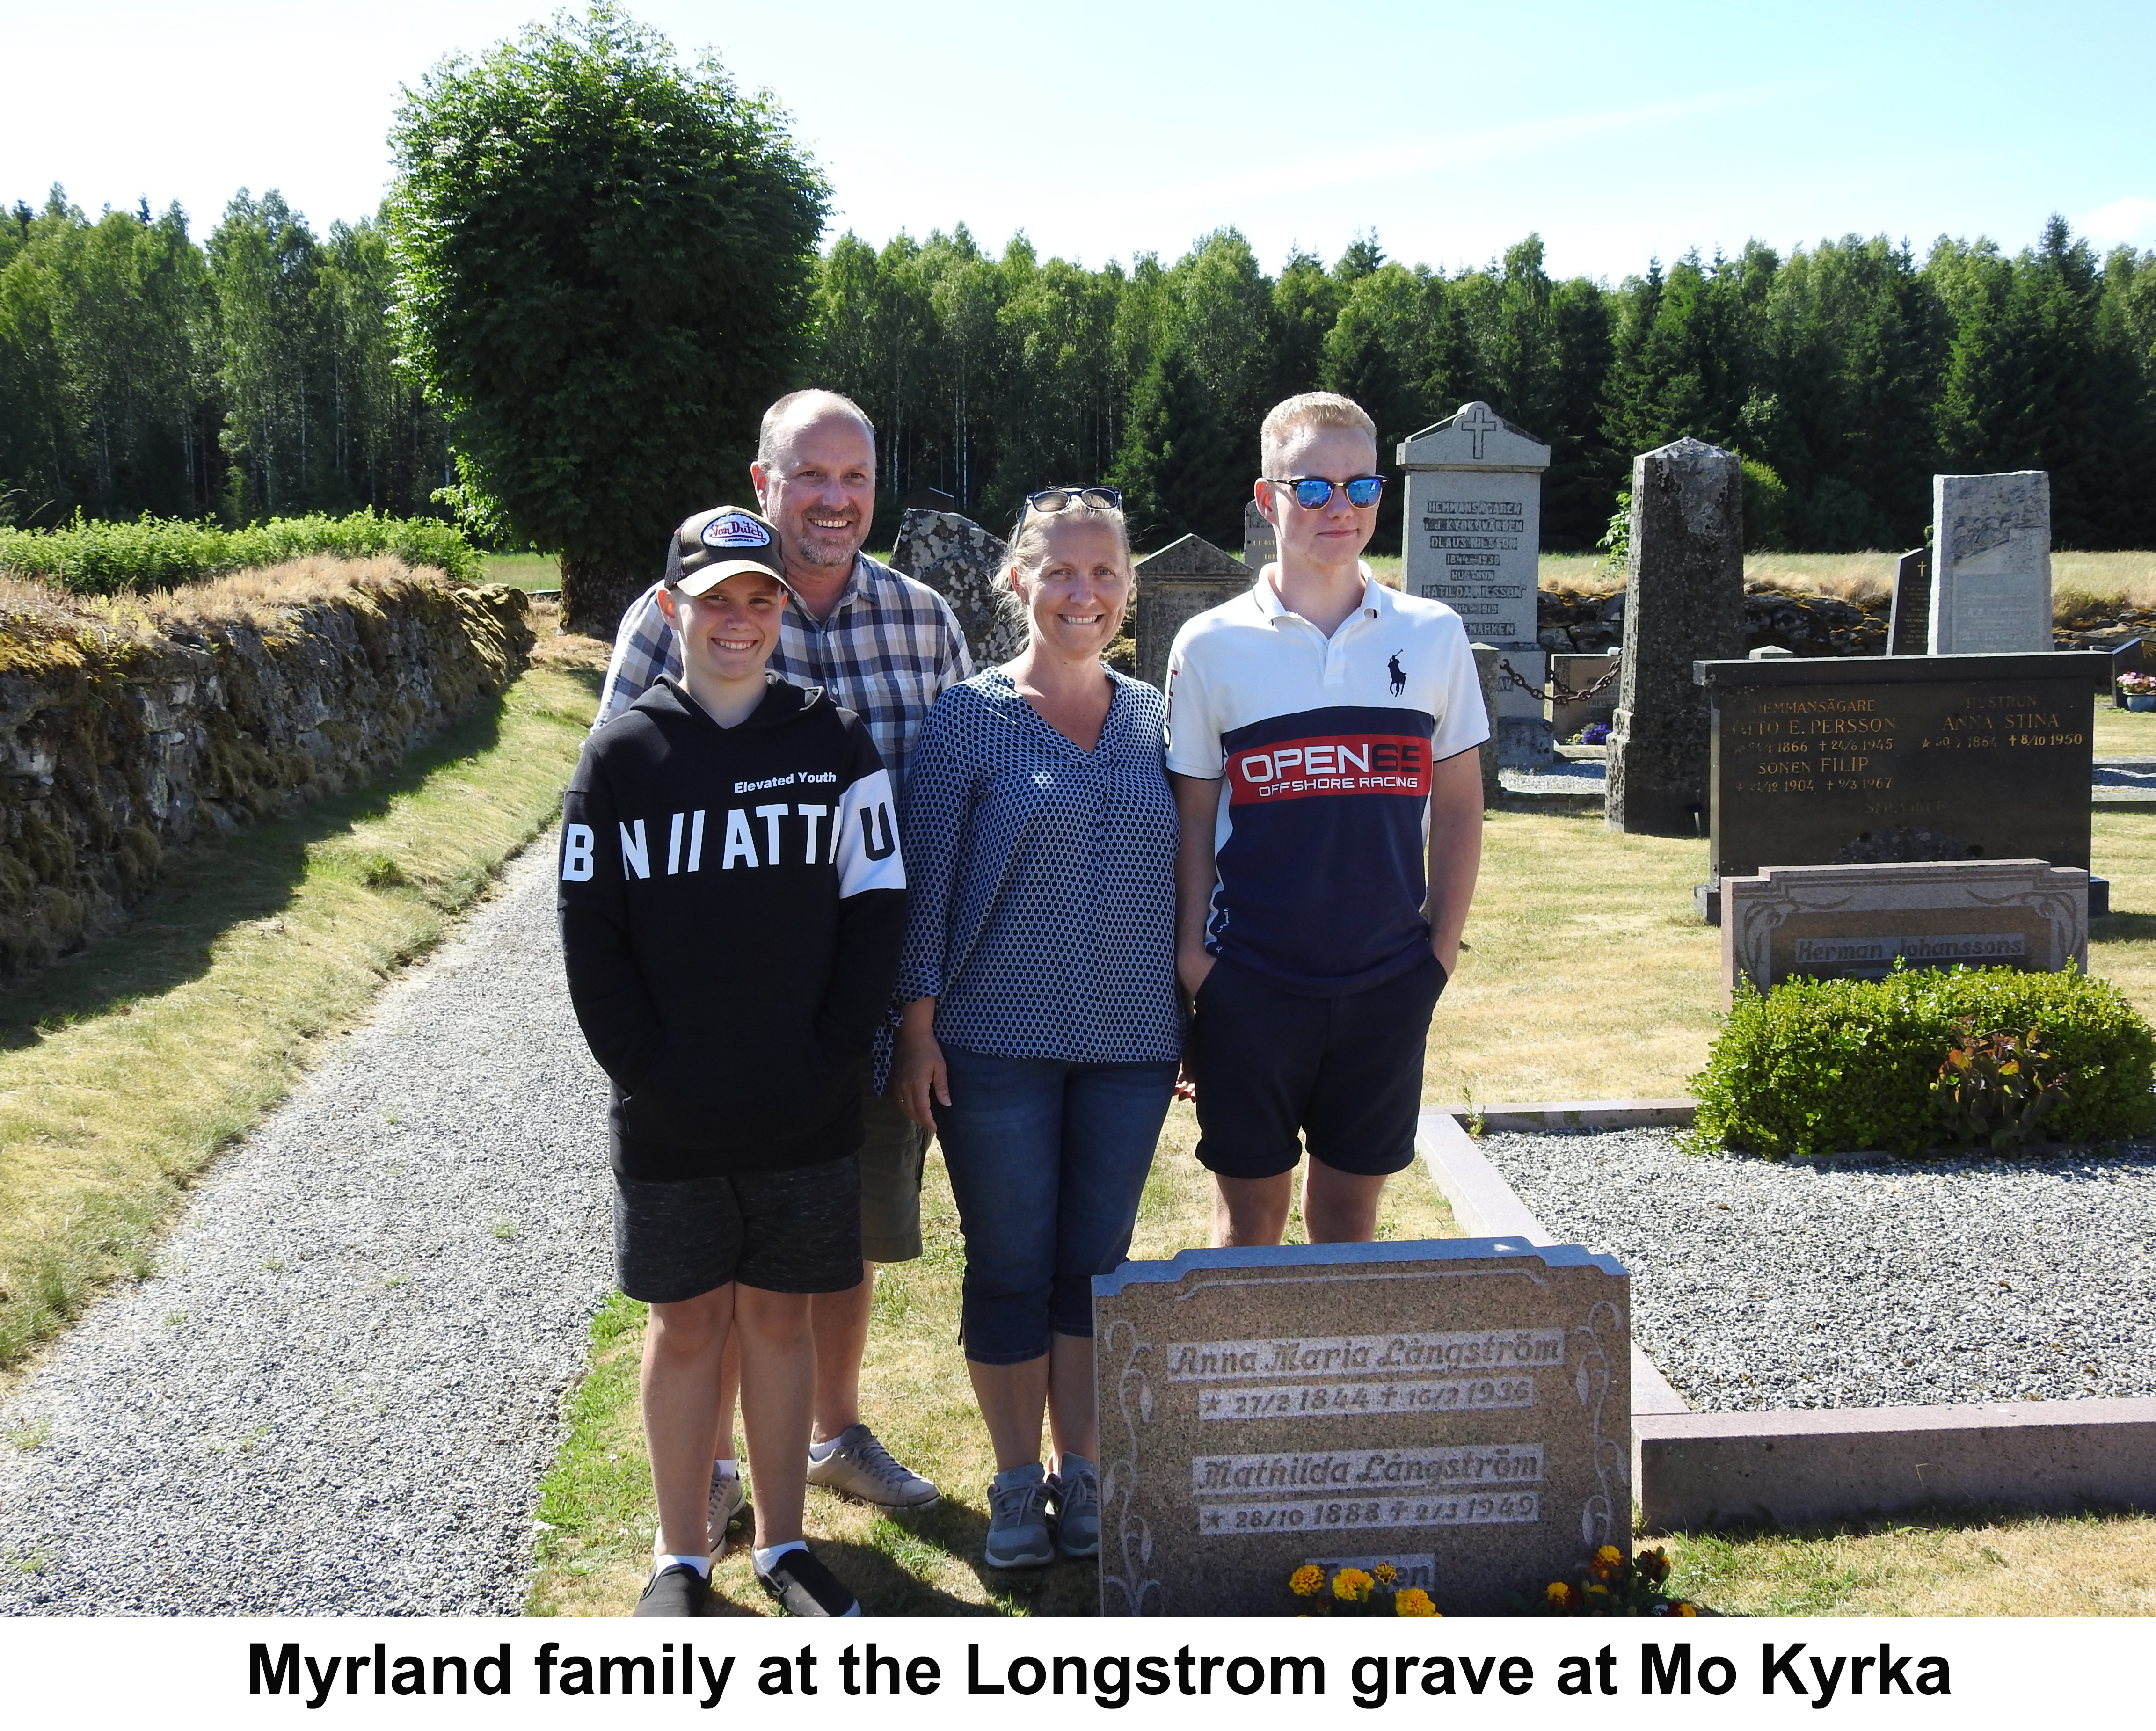 The Myrlands are standing in the graveyard behind the stone for 
           Anna Maria, her daughter Mathilda, and grandson Harry